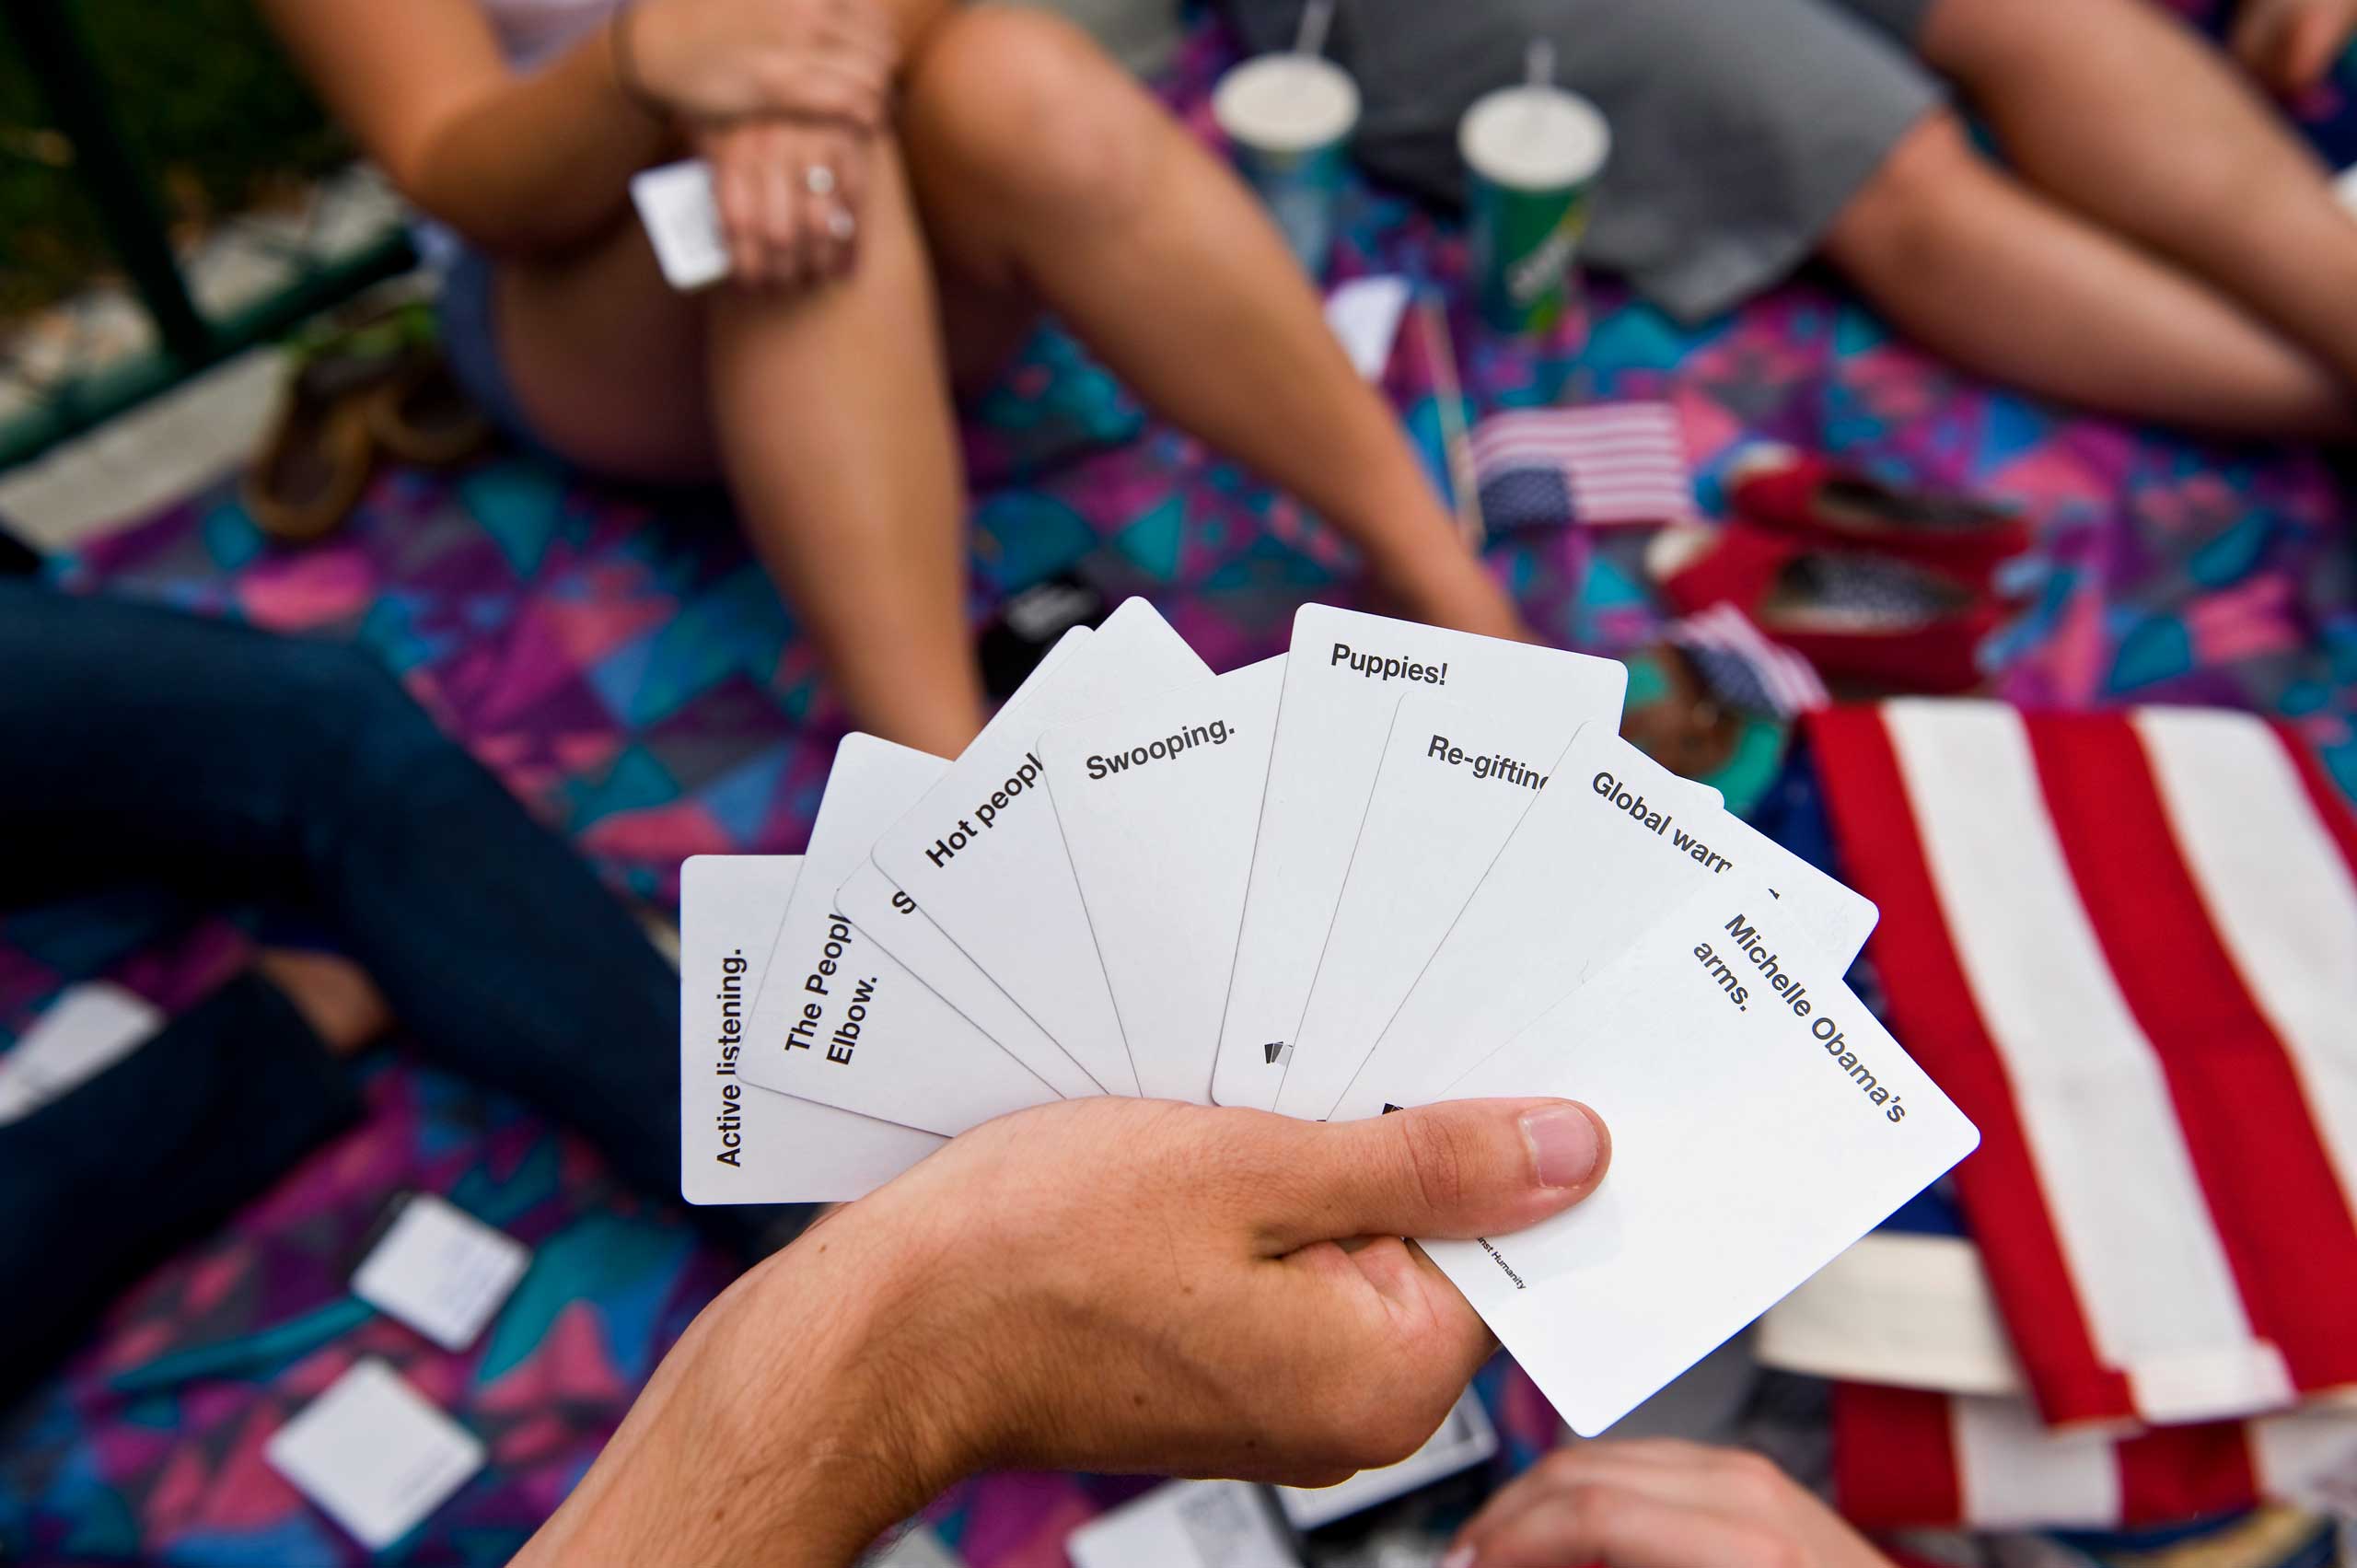 Students play Cards Against Humanity in Denver. (Brian Cahn—Zuma Press/Corbis)